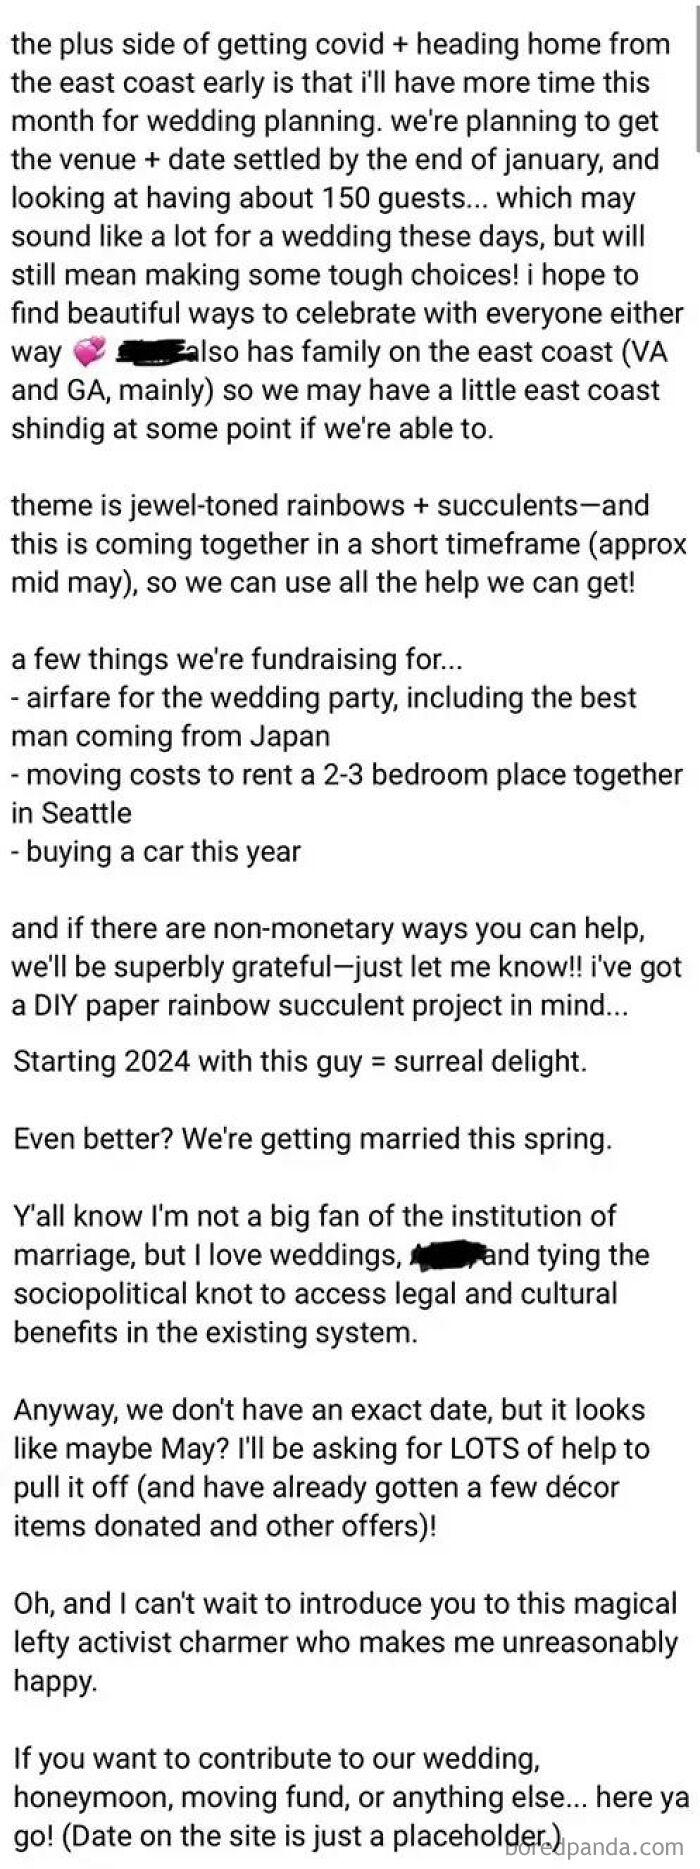 Crowdfunded Wedding From Someone Who Could Get An Actual Job But Won’t